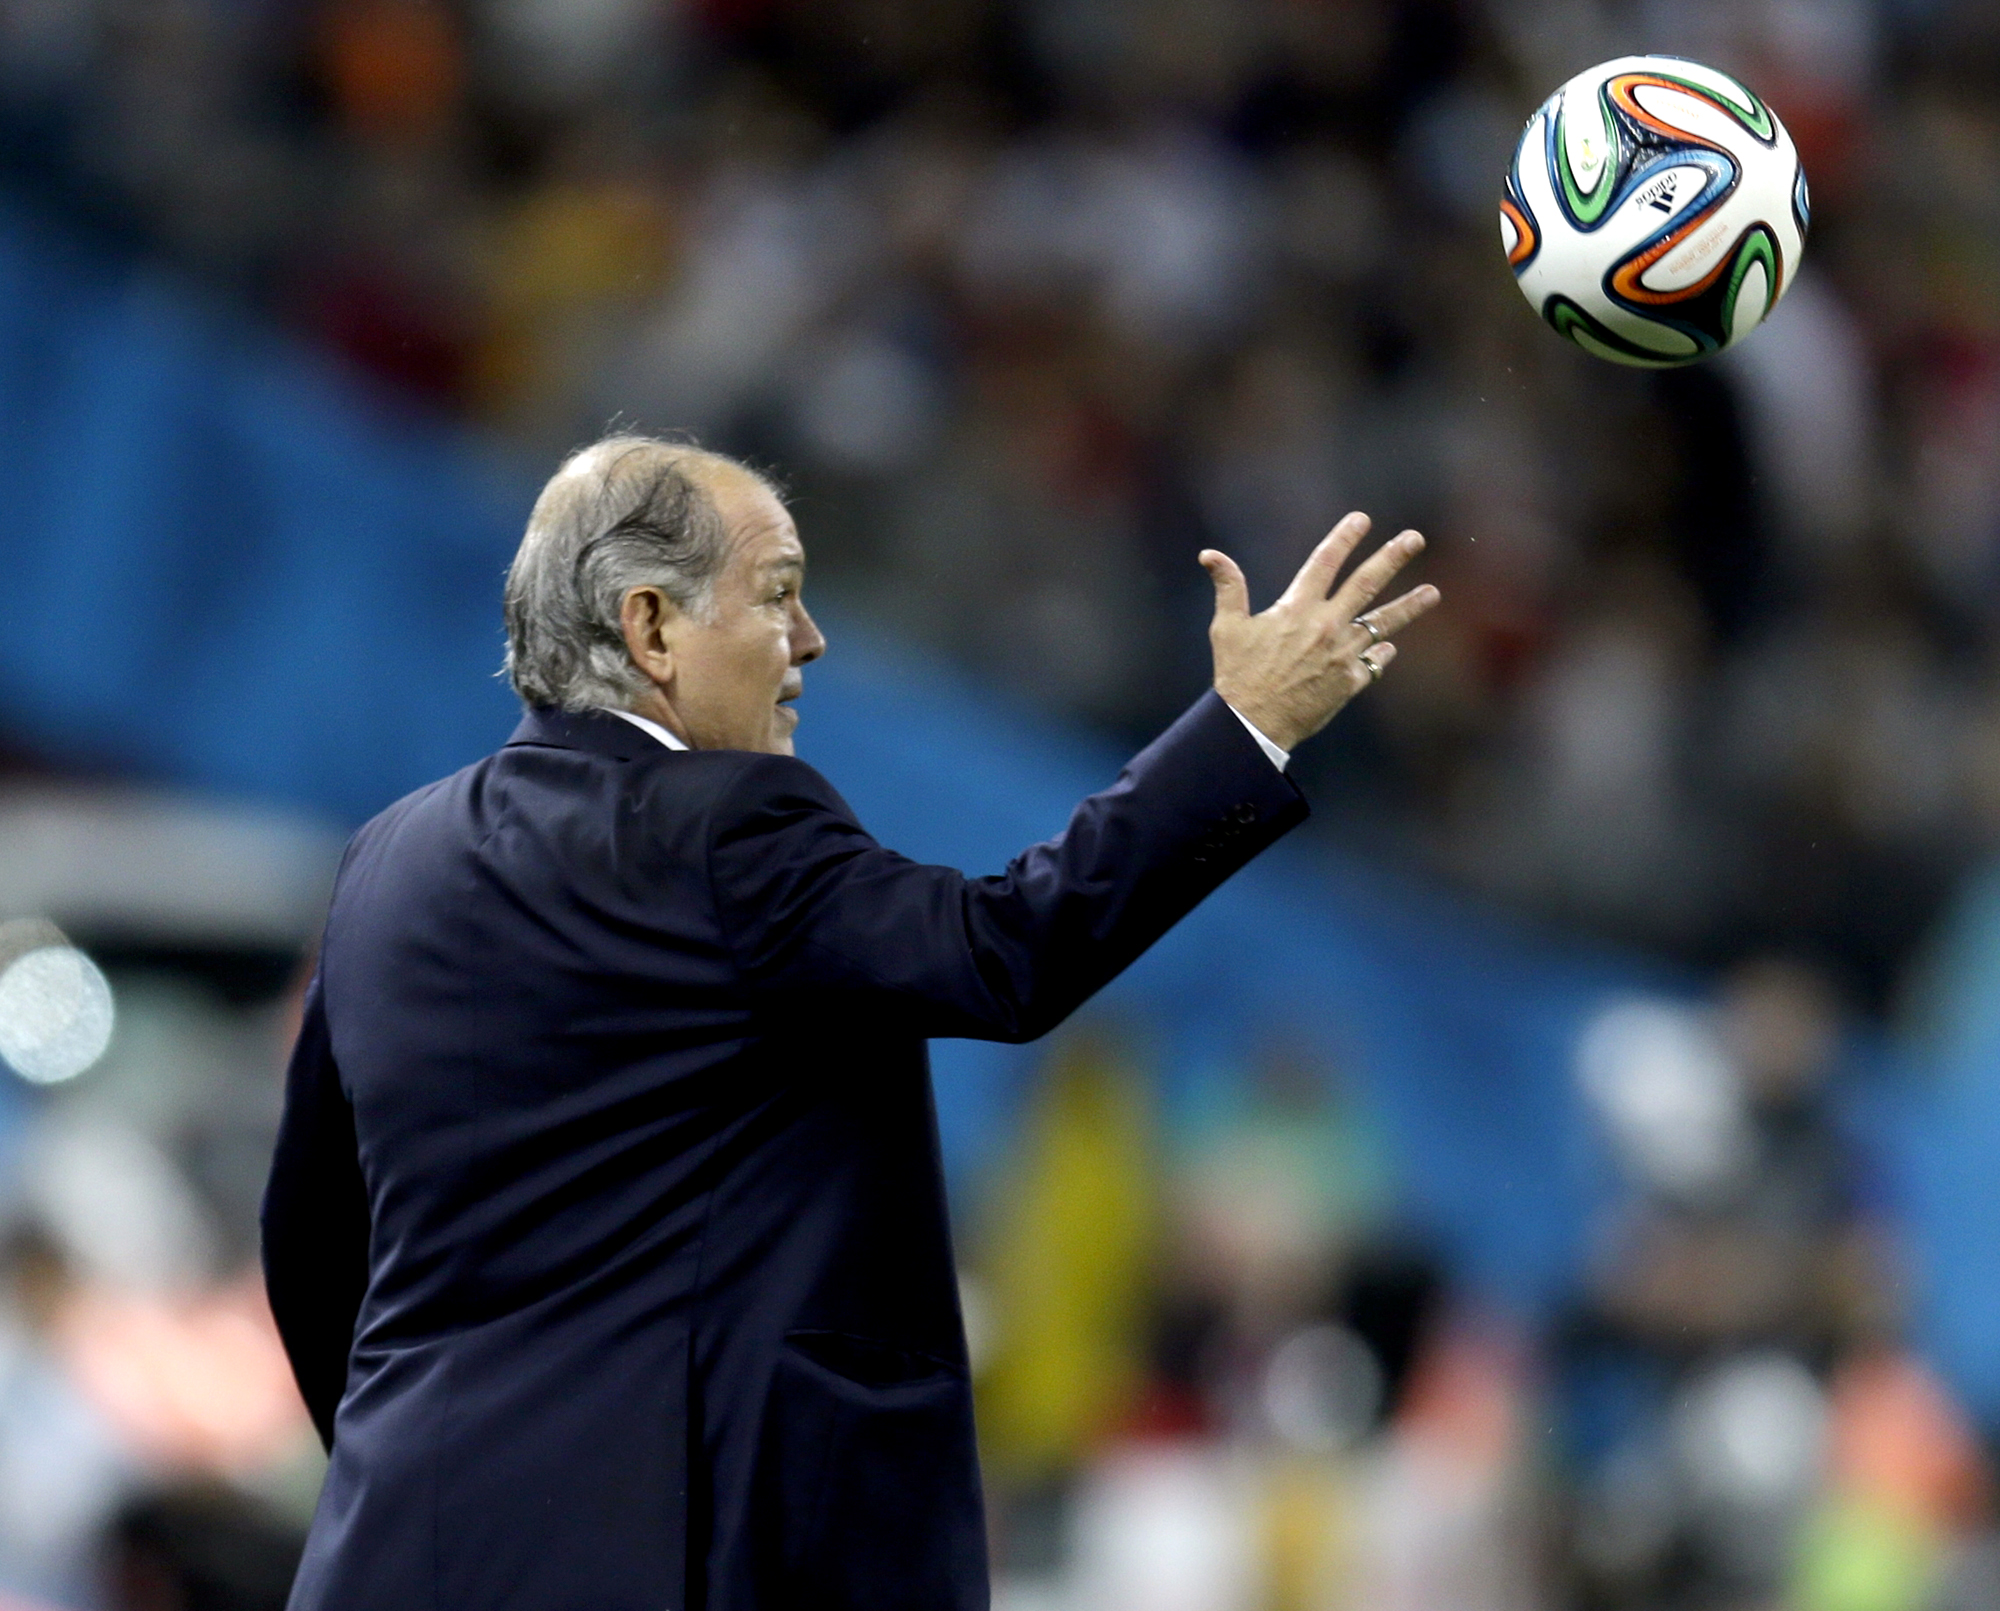 Argentina coach Alejandro Sabella will leave his post regardless of the final result. Photo: AP